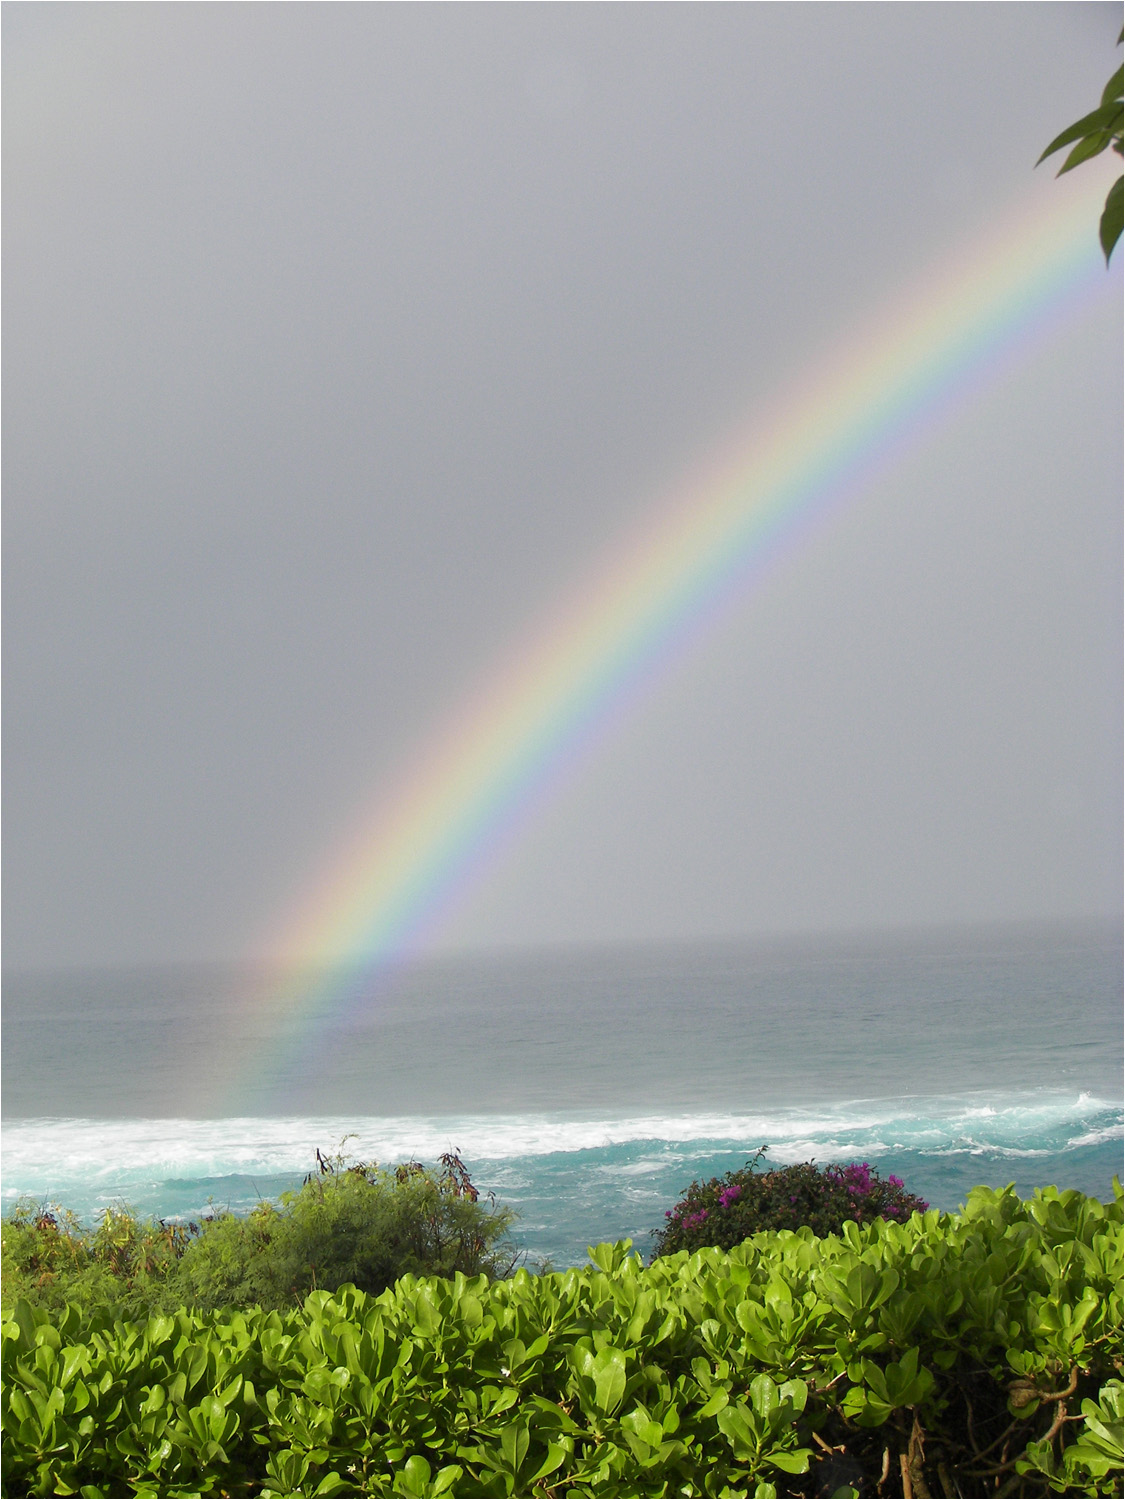 View of rainbow taken from the lanai